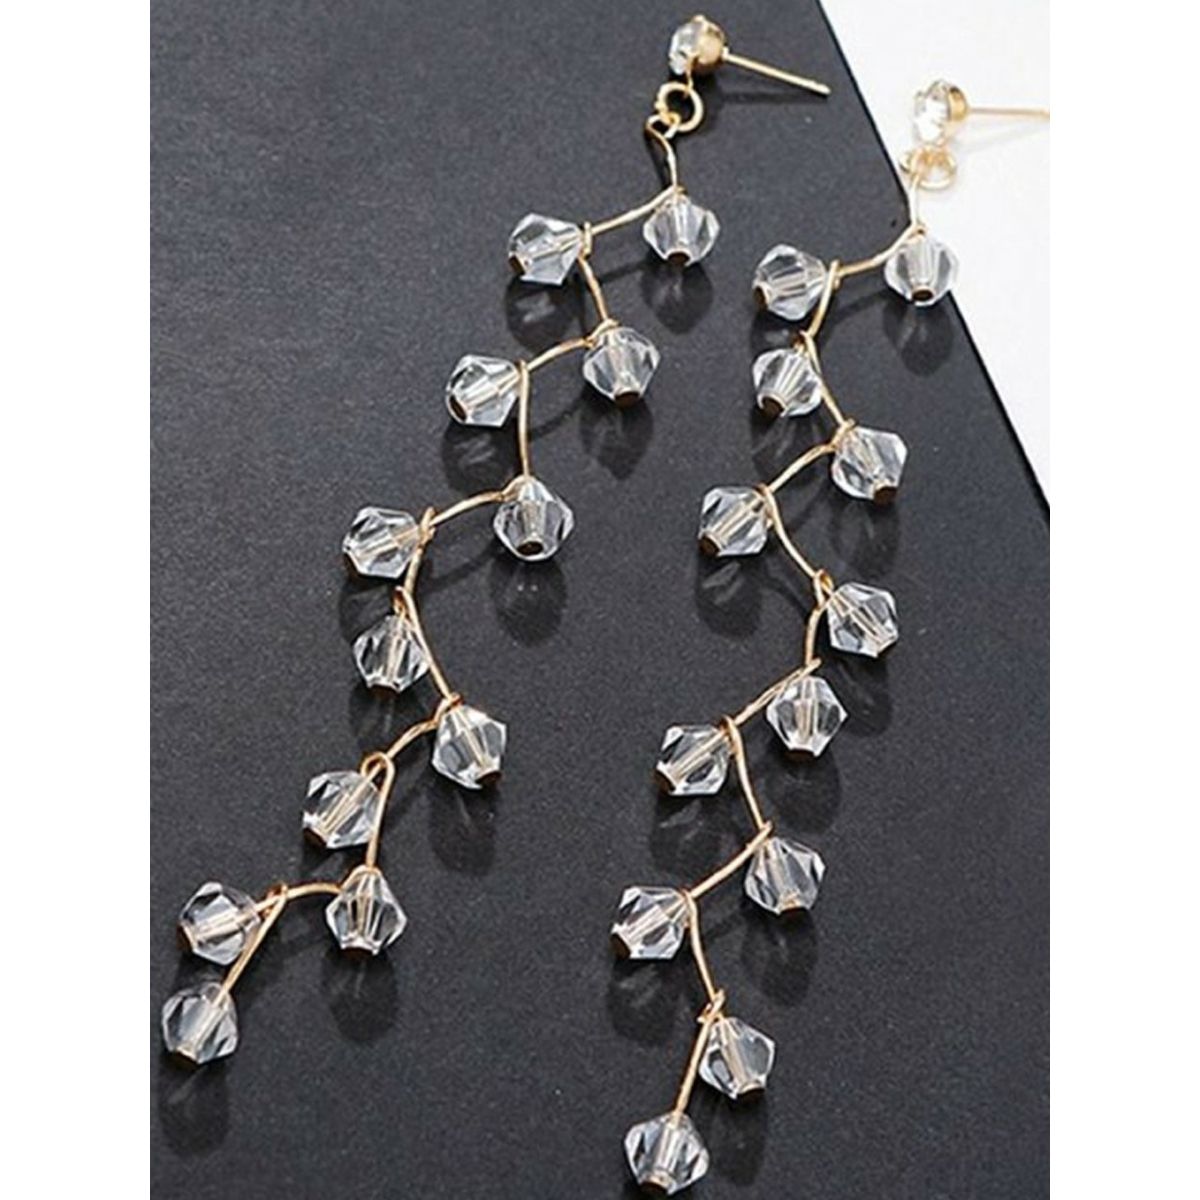 Discover 83+ crystal drop earrings india latest